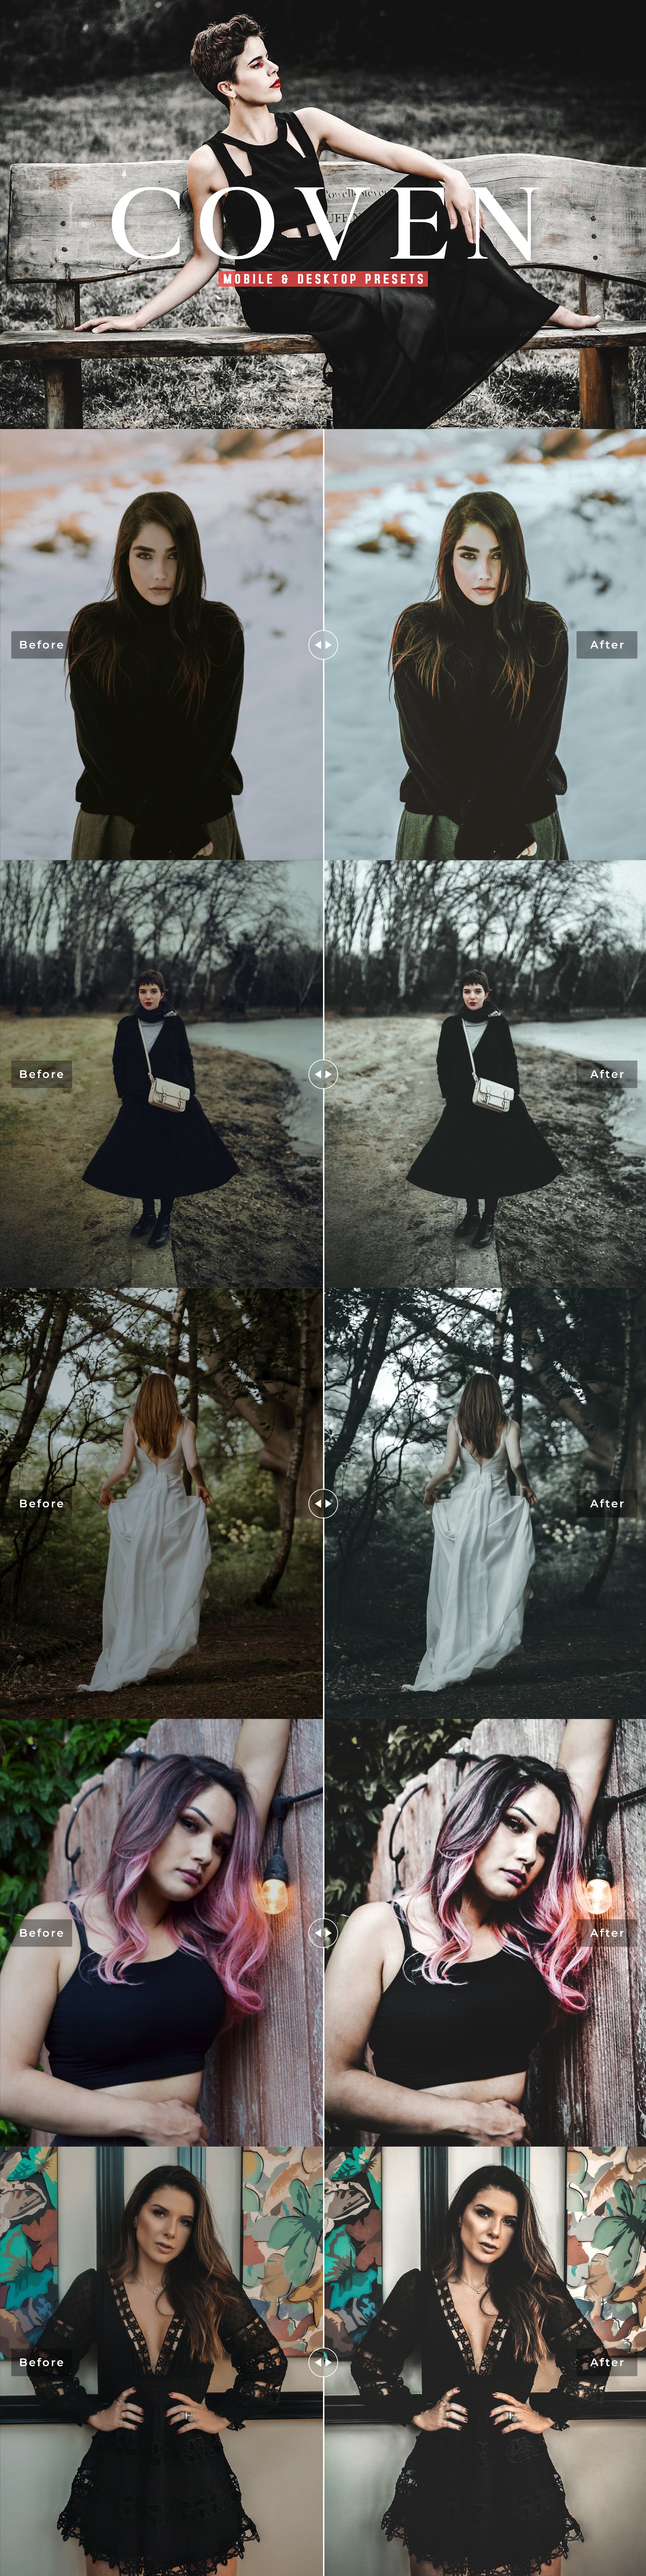 Coven Pro Lightroom Presetscover image.